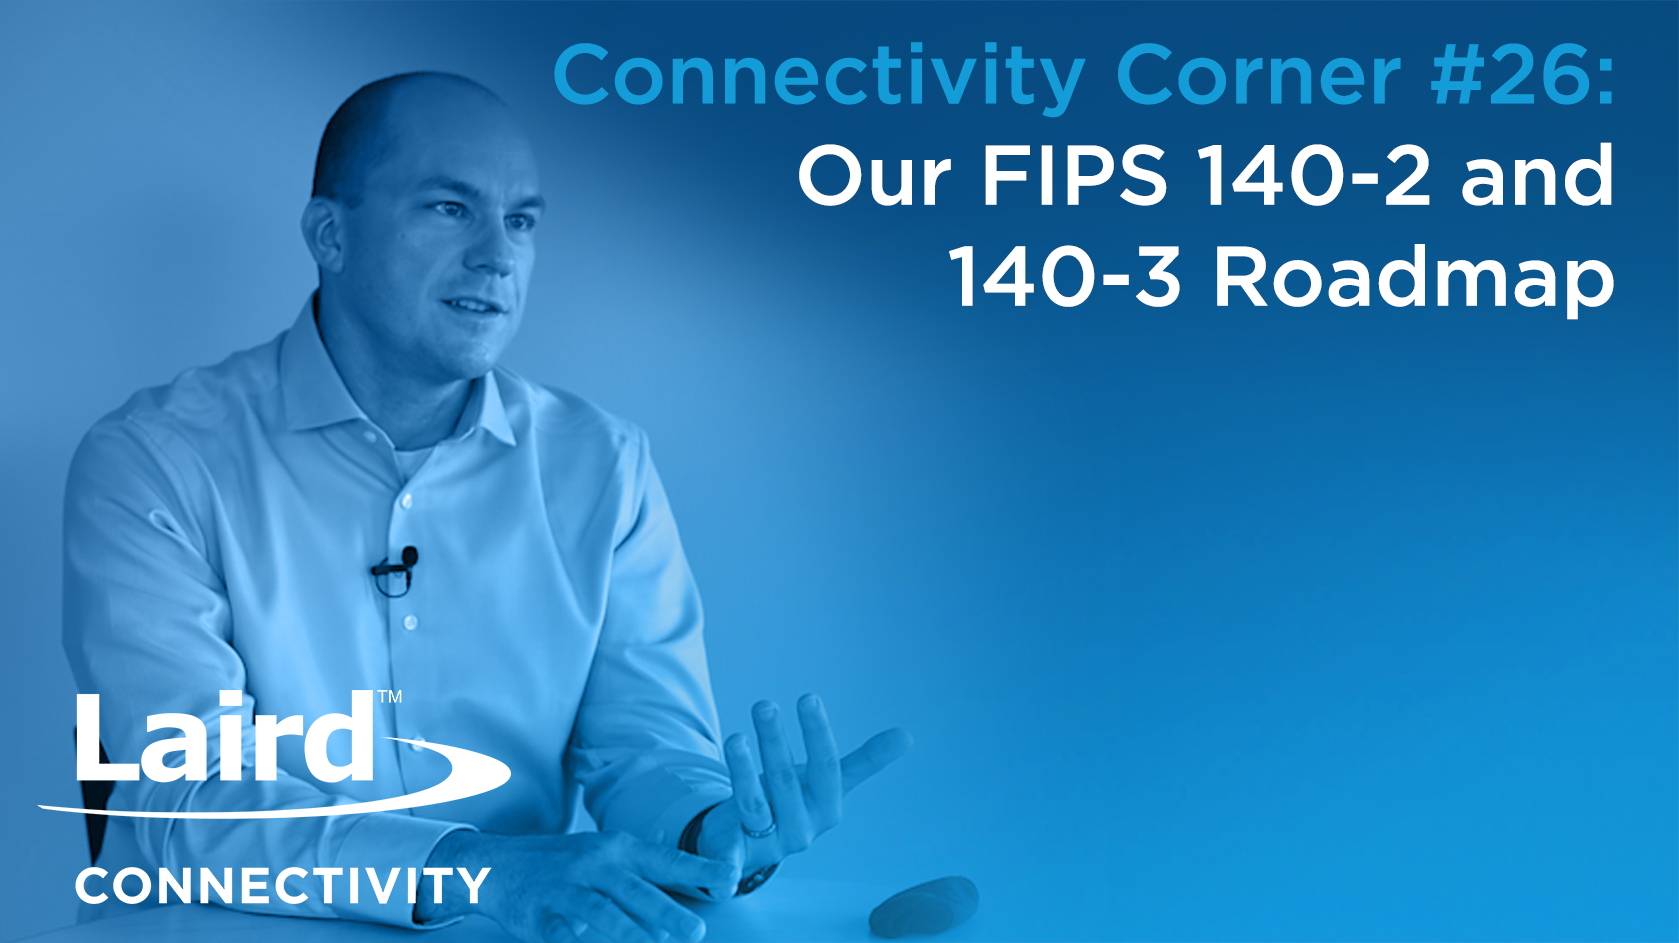 Episode 26: Our FIPS 140-2 and 140-3 Roadmap